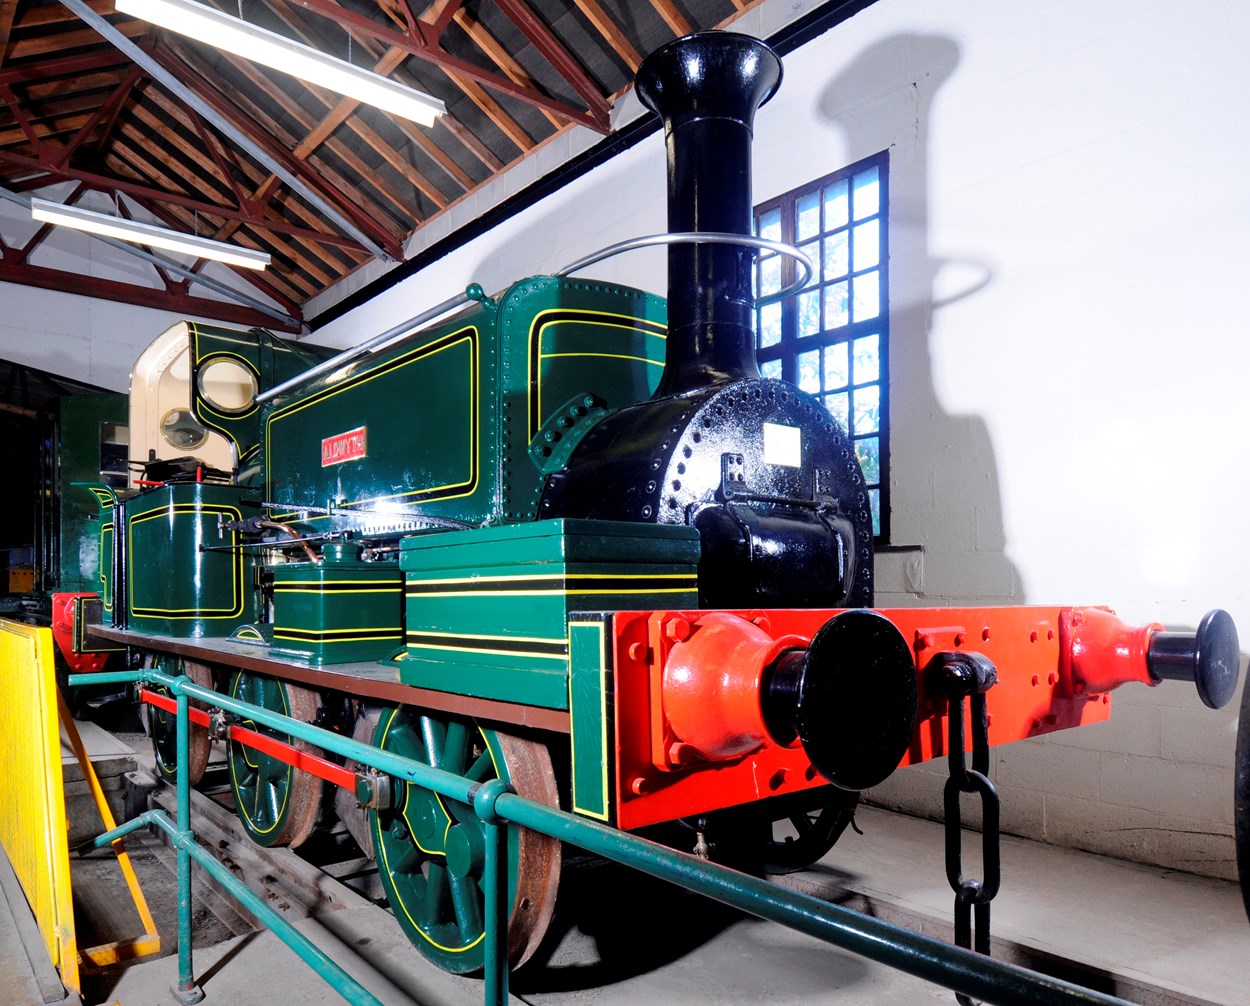 Leeds Industrial Museum: Leeds locomotive Aldwyth, twinned with another Manning Wardle locomotive Nellie which was built for the Sierra Leone Government Railway in 1915.